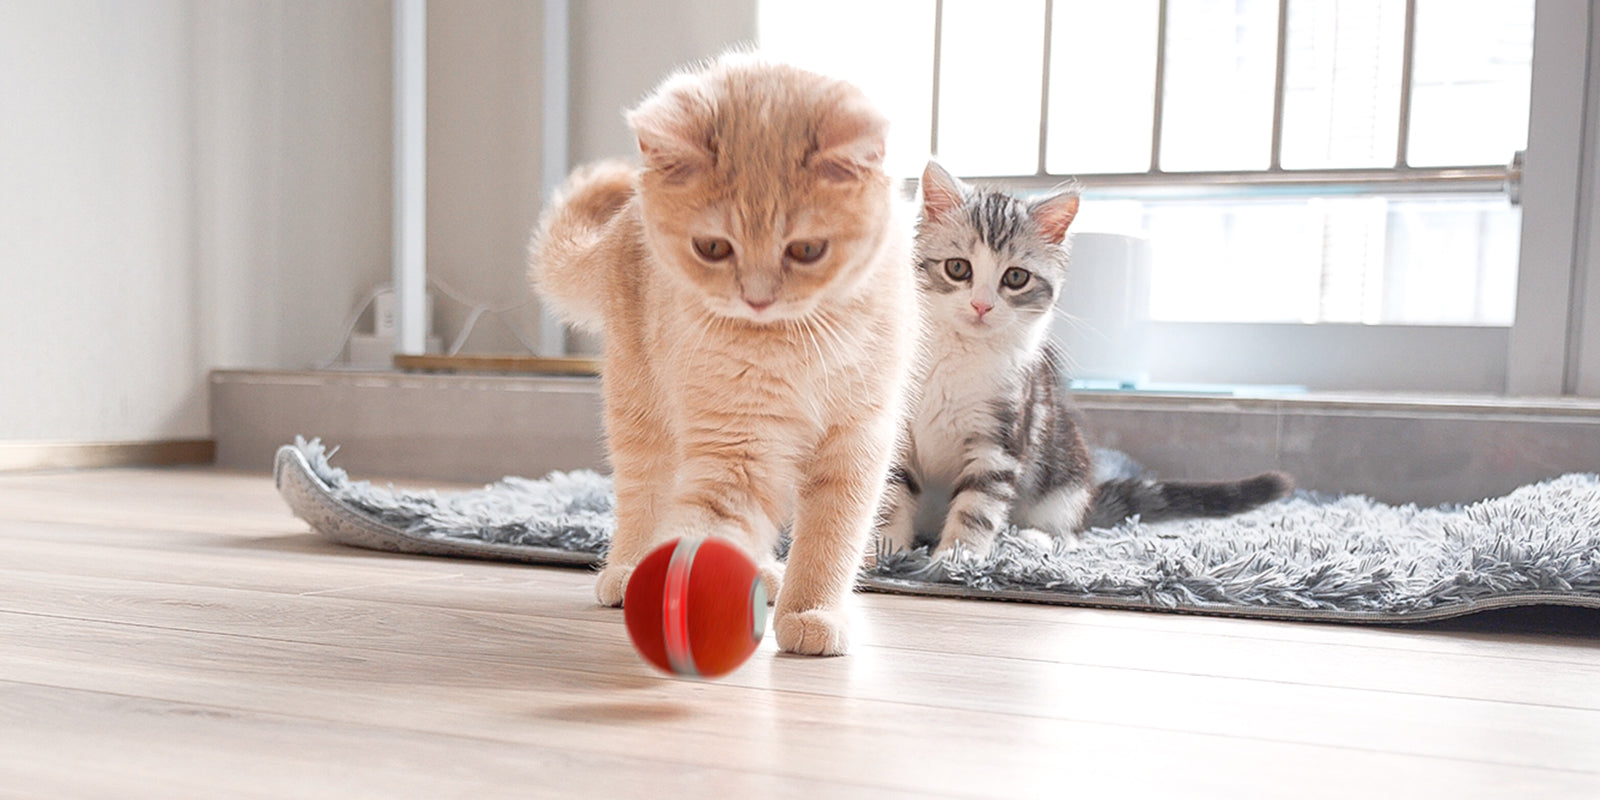 Cheerble Ball: Tiny Smart Ball for Your Cat's Entertainment